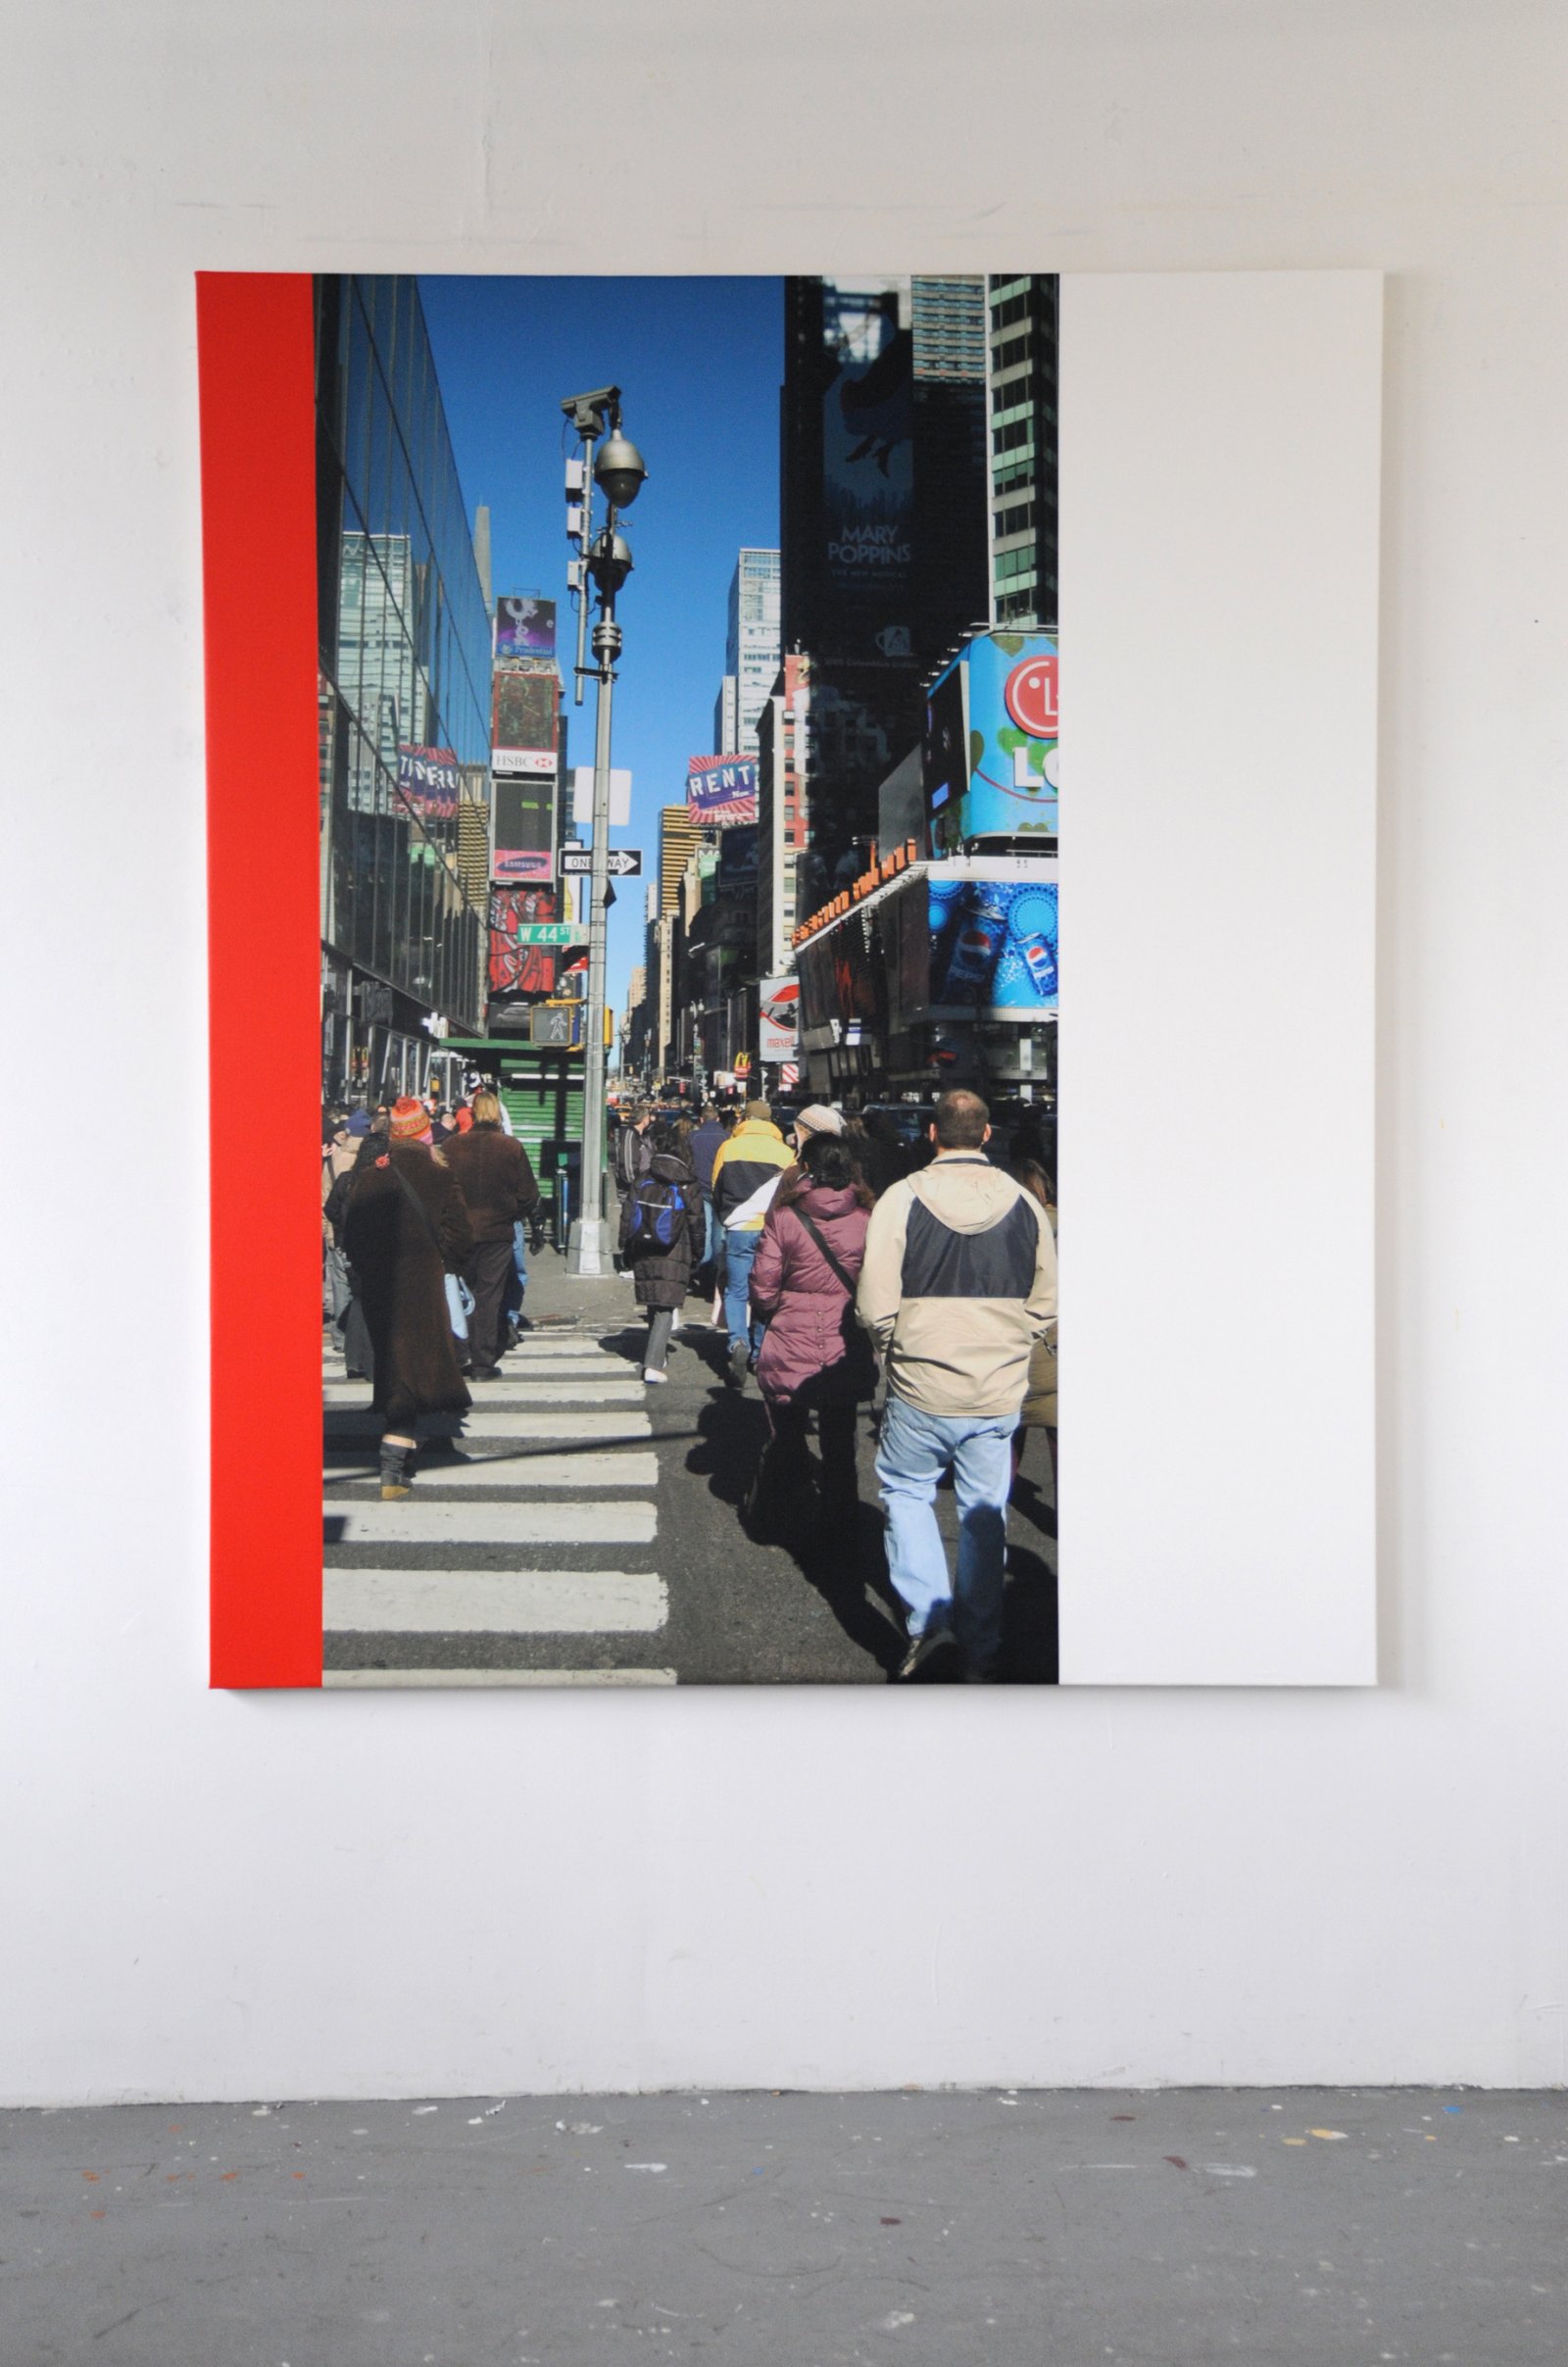 Ian Wallace, Times Square Crowd NYC, 2009, photolaminate with acrylic on canvas, 71 7/8 x 59 7/8 in. (183 x 152 cm)